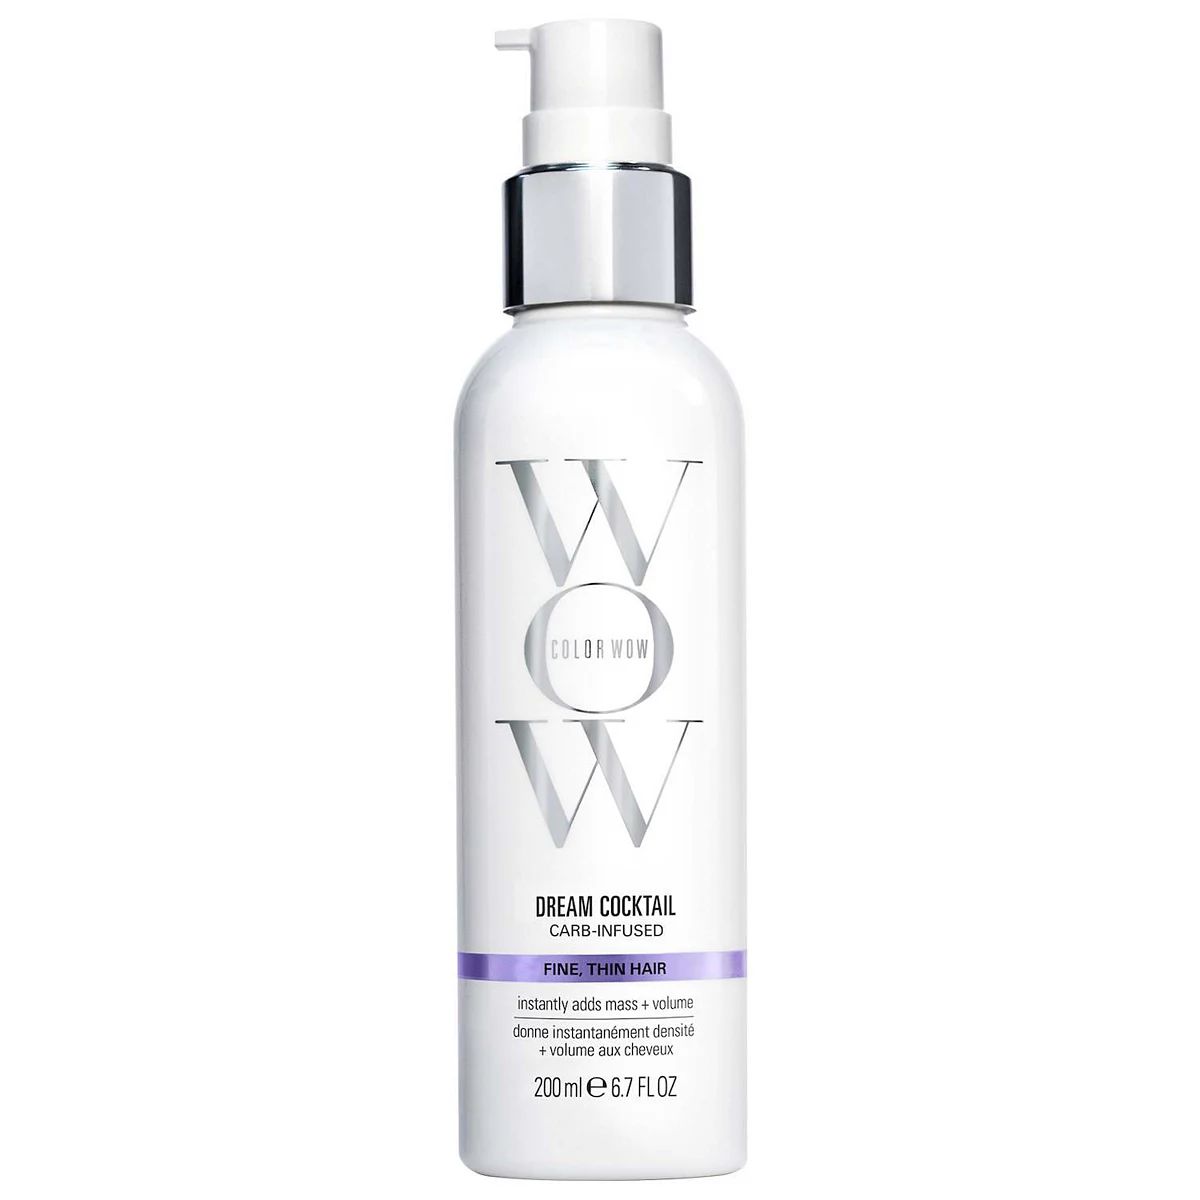 COLOR WOW Dream Cocktail Carb-Infused Thickening Leave In Treatment | Kohl's